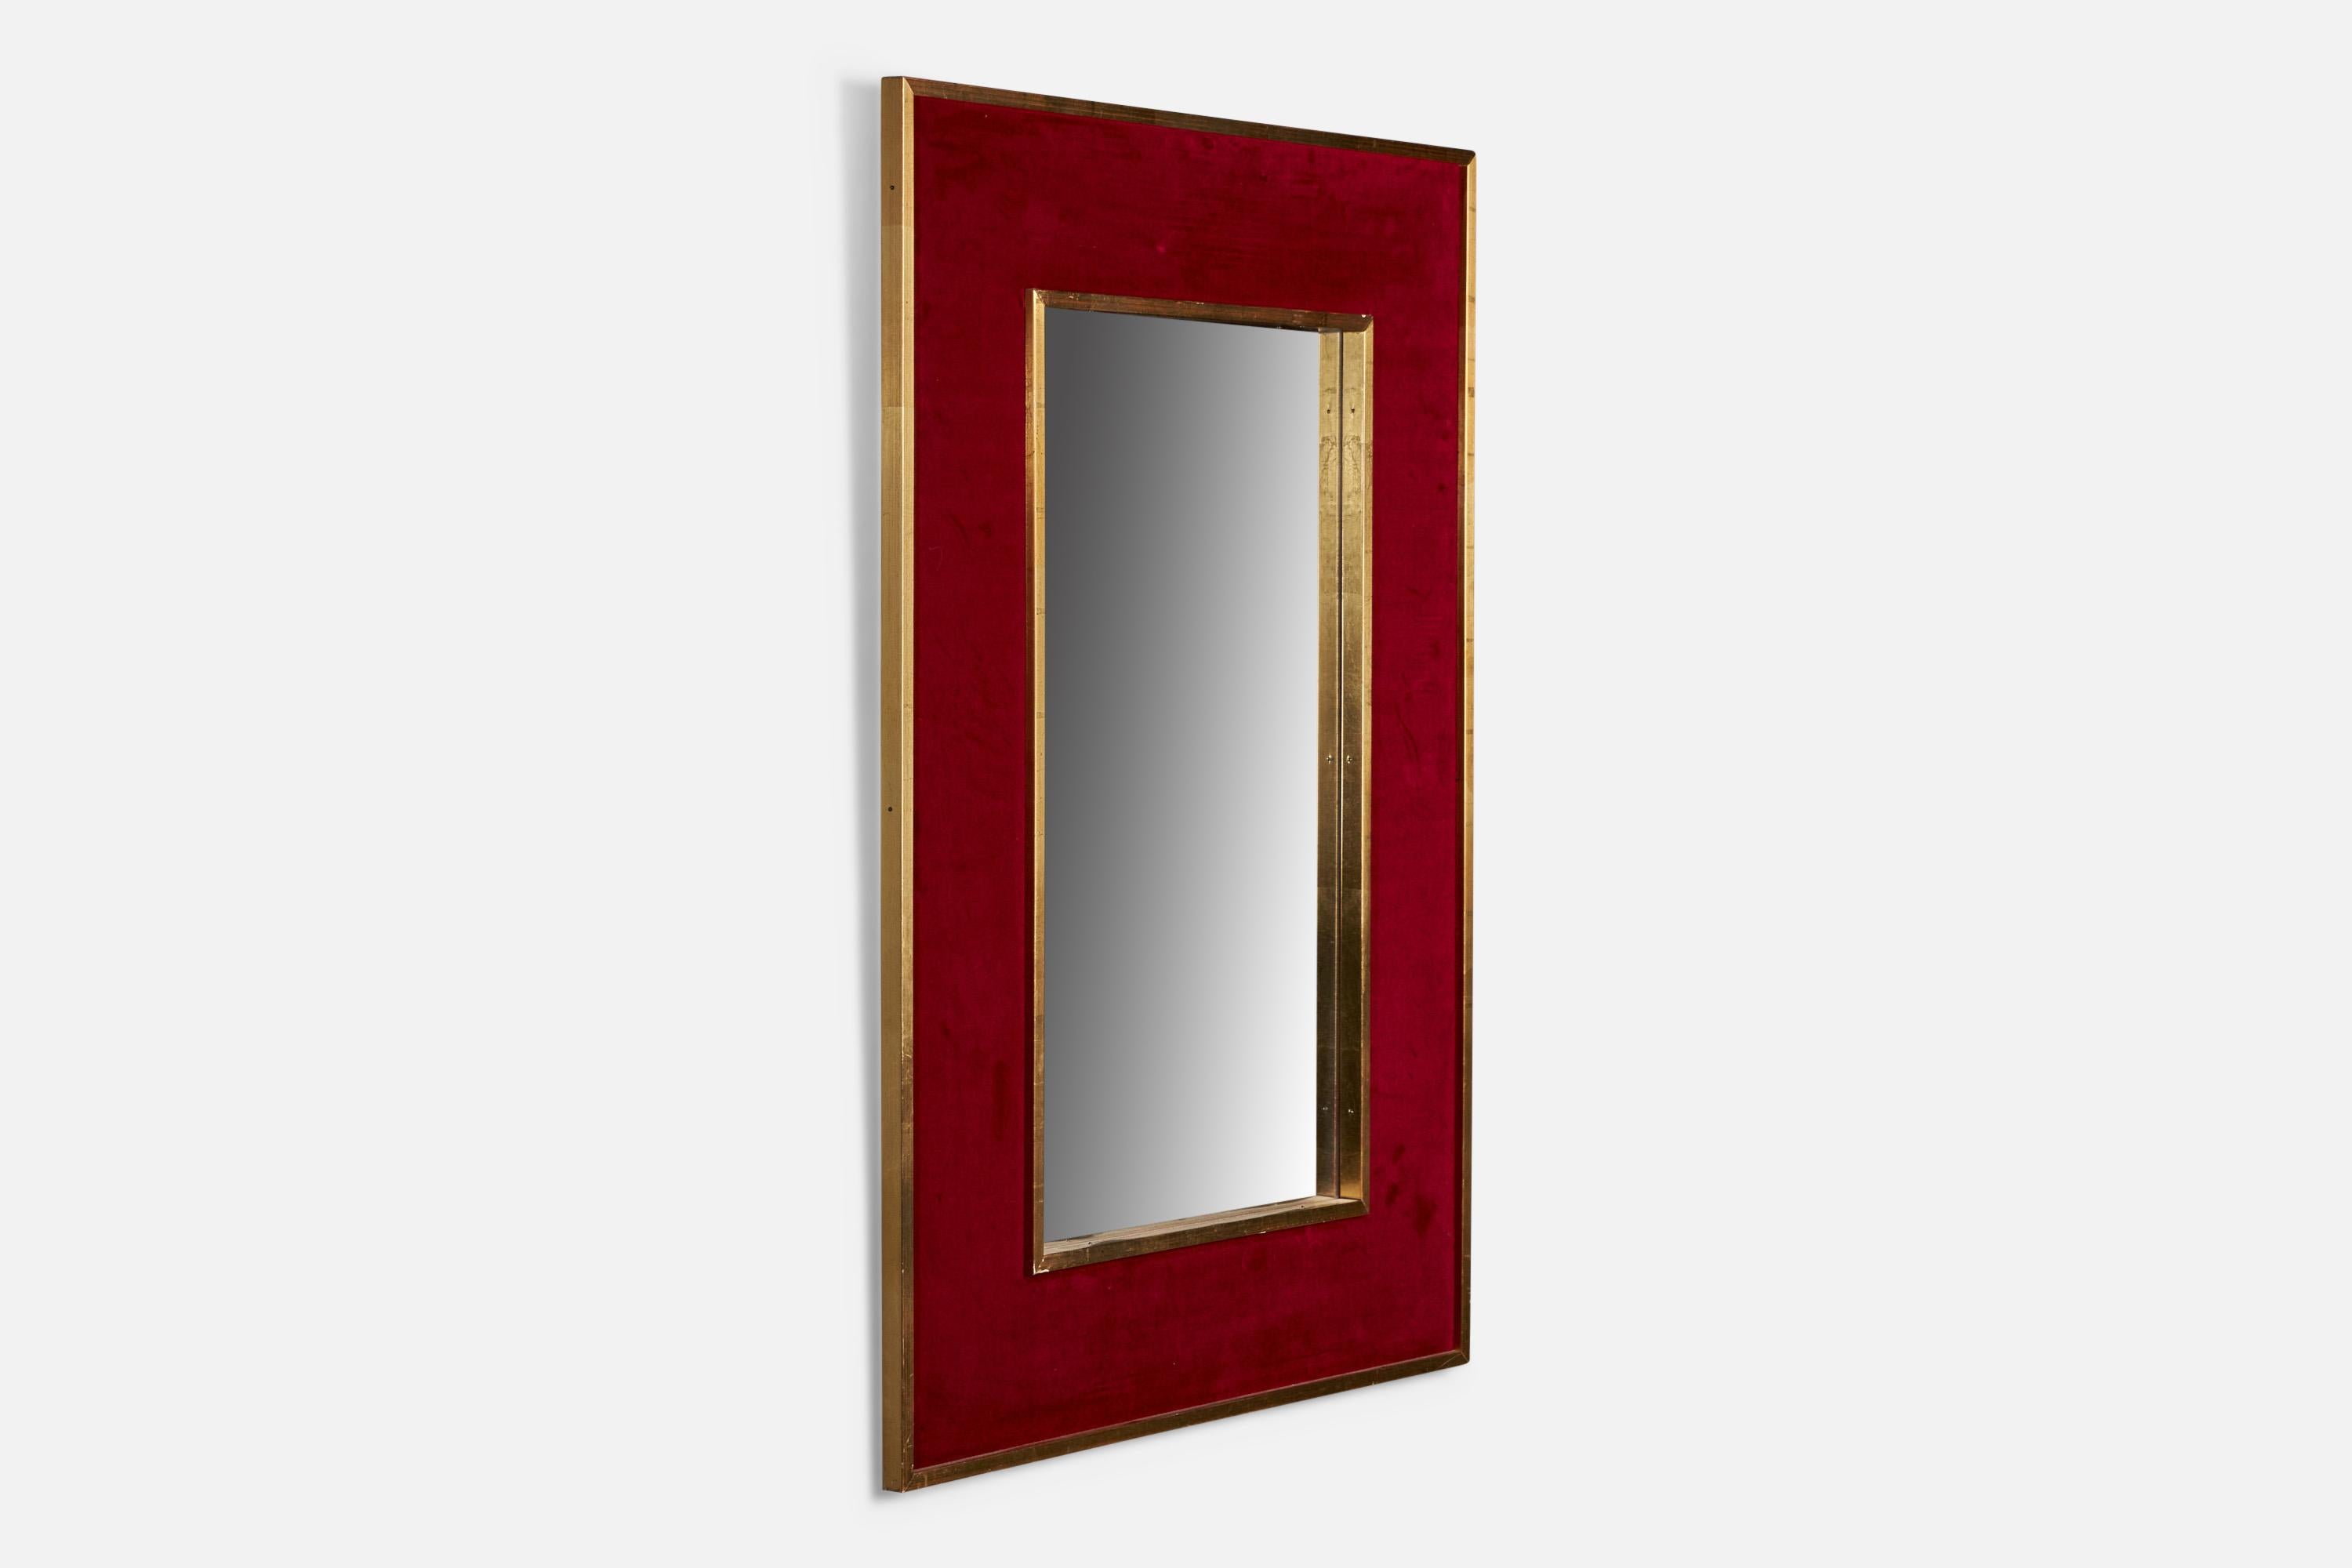 A red fabric and gilt wood wall mirror, designed and produced in Sweden, c. 1950s.